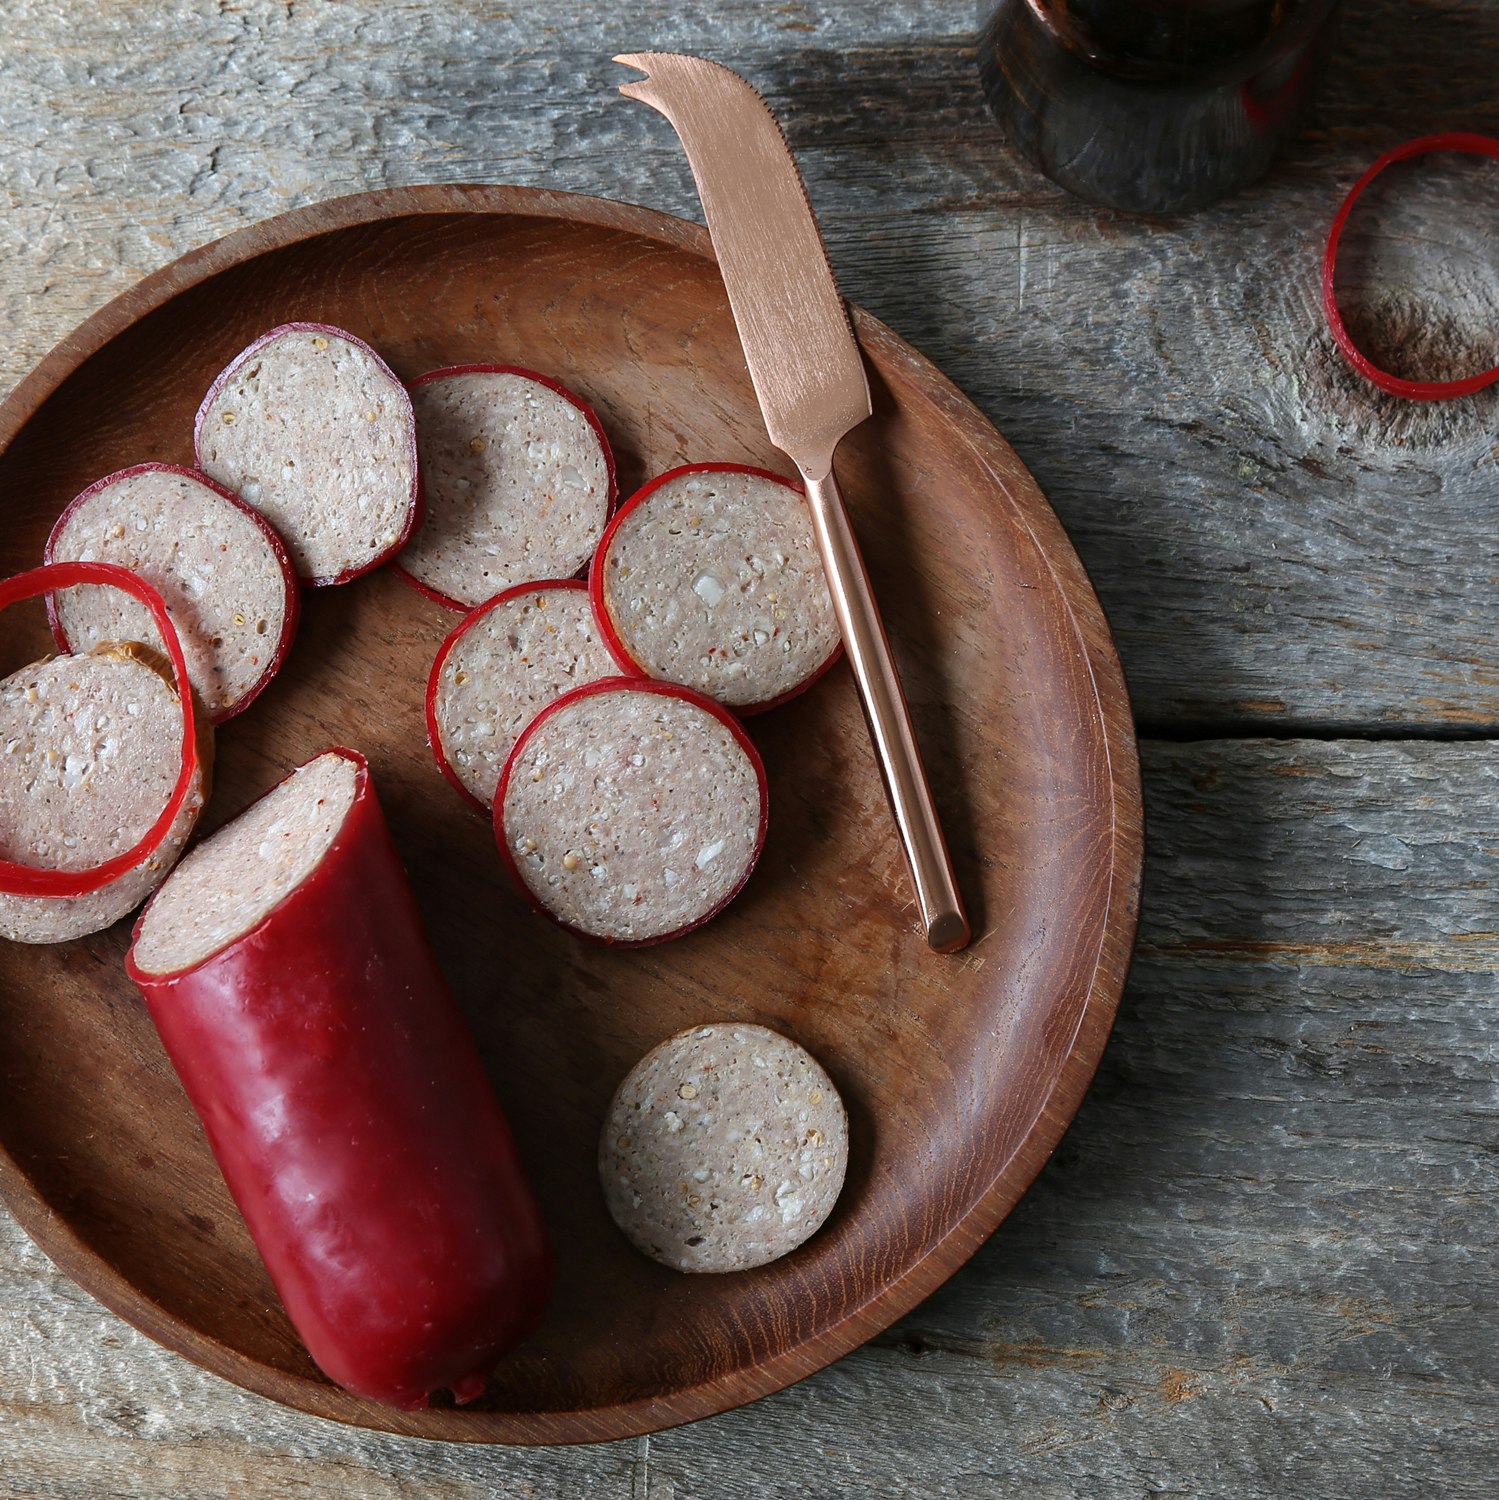 Olympia Provisions Summer Sausage meats